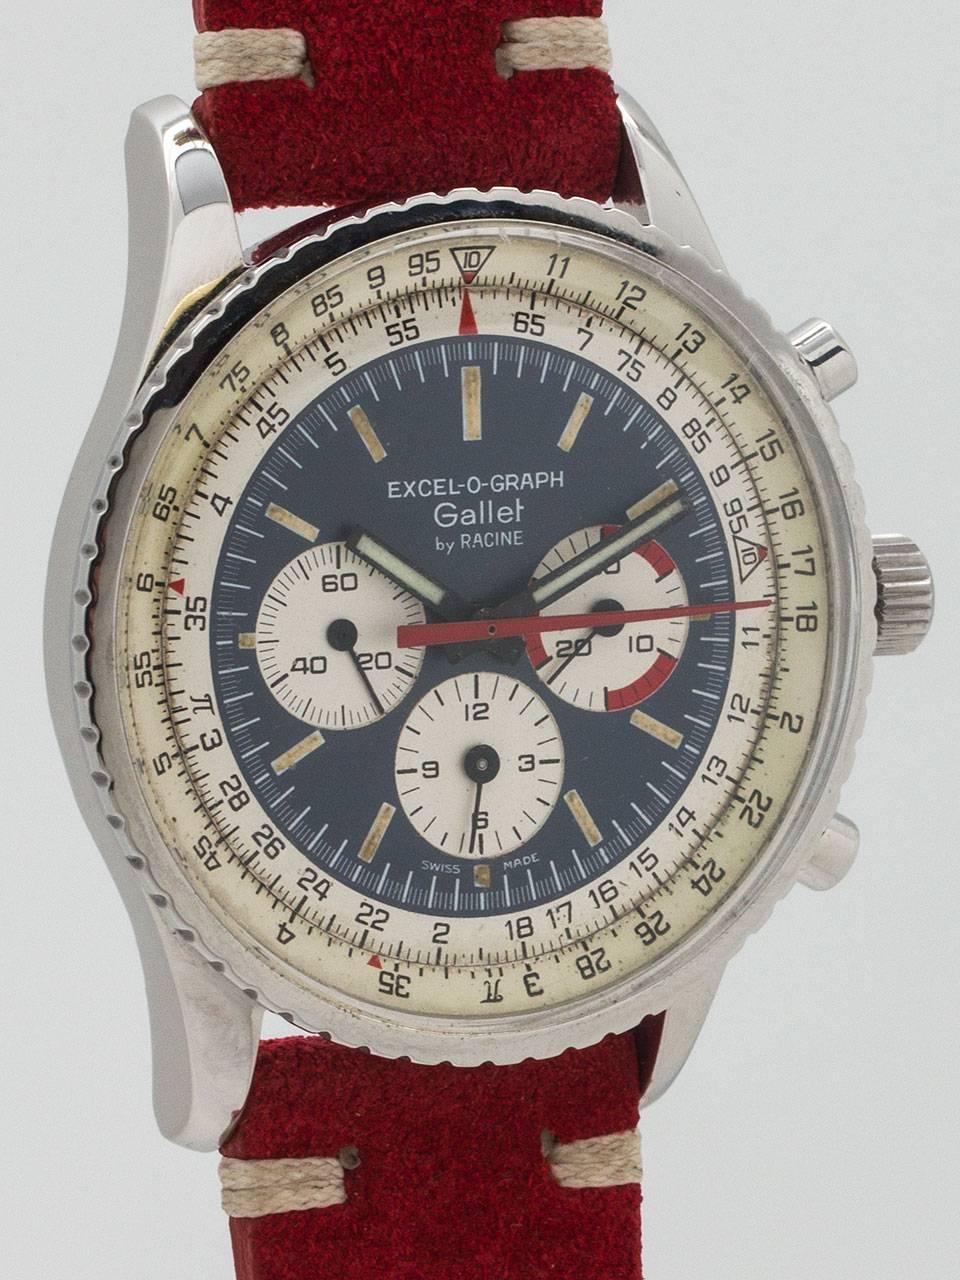 Gallet by Racine Stainless Steel Excel-O-Graph Wristwatch circa 1960s. Large and impressive 3 registers manual wind chronograph. Unusual model featuring 40mm Breitling Navitimer style case with pie crust rotating bezel, round pushers and heavy snap